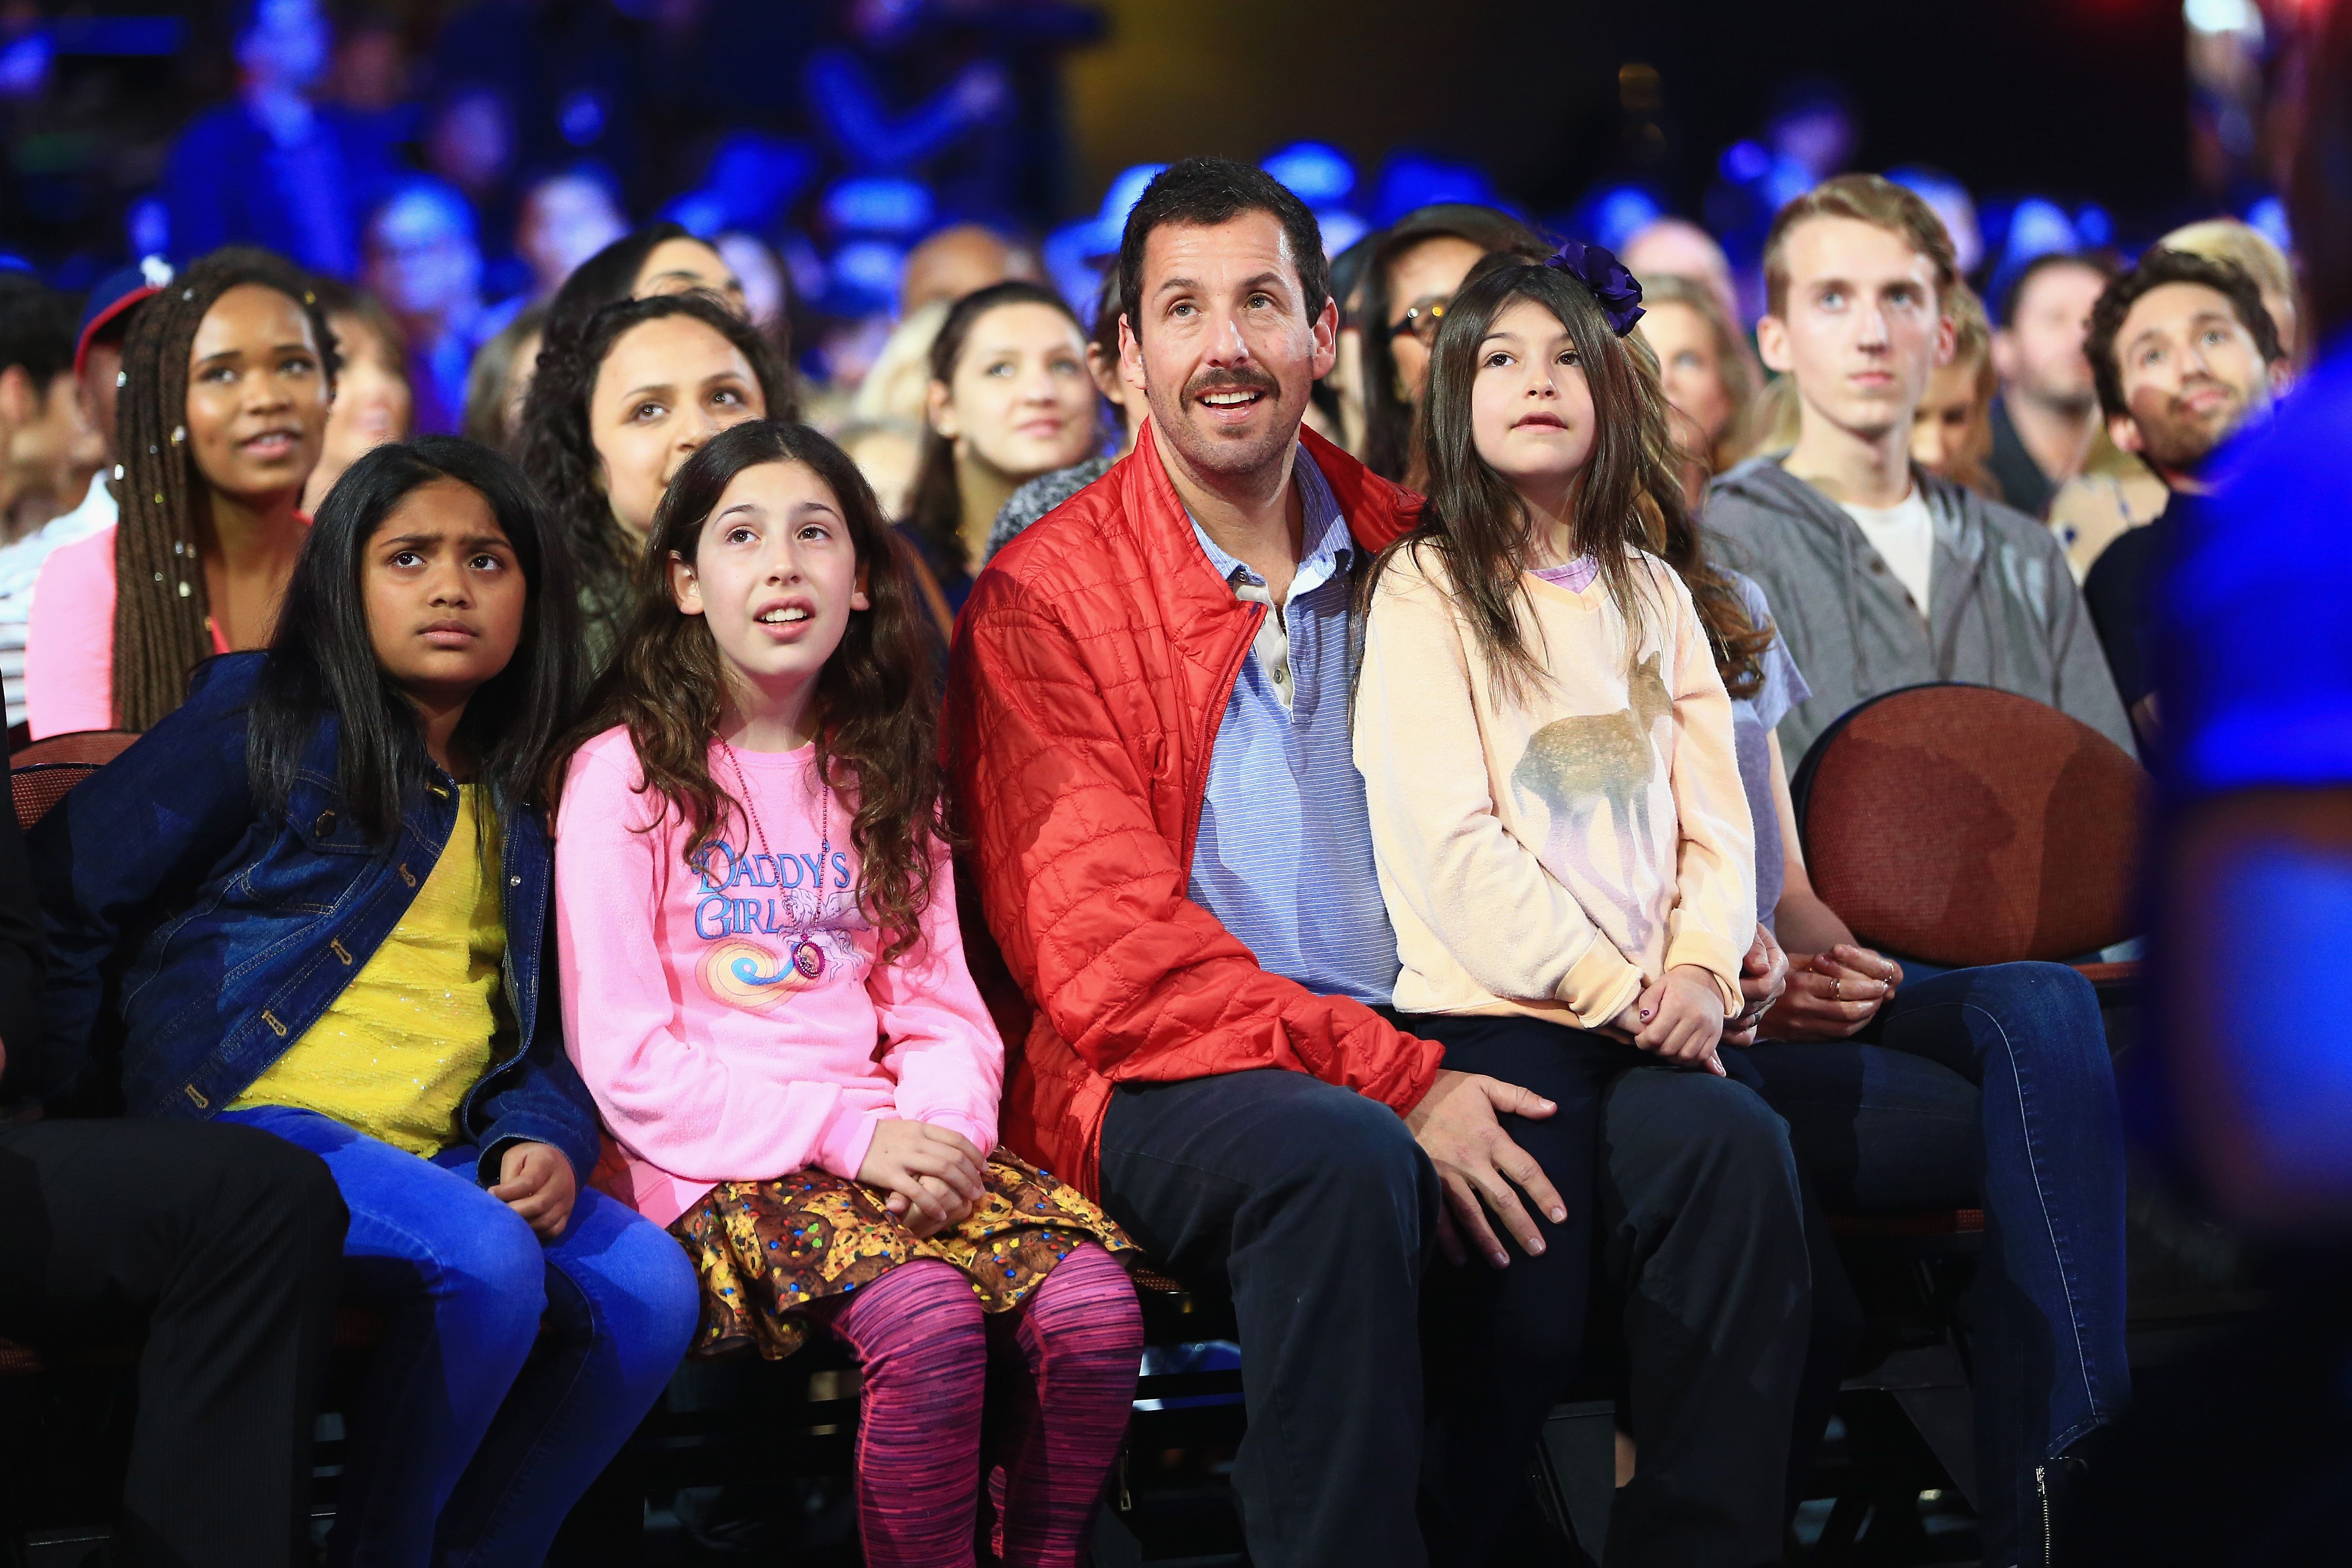 Adam Sandler, with daughters Sunny and Sadie Sandler at the Nickelodeon's 2016 Kids' Choice Awards in California | Source: Getty Images